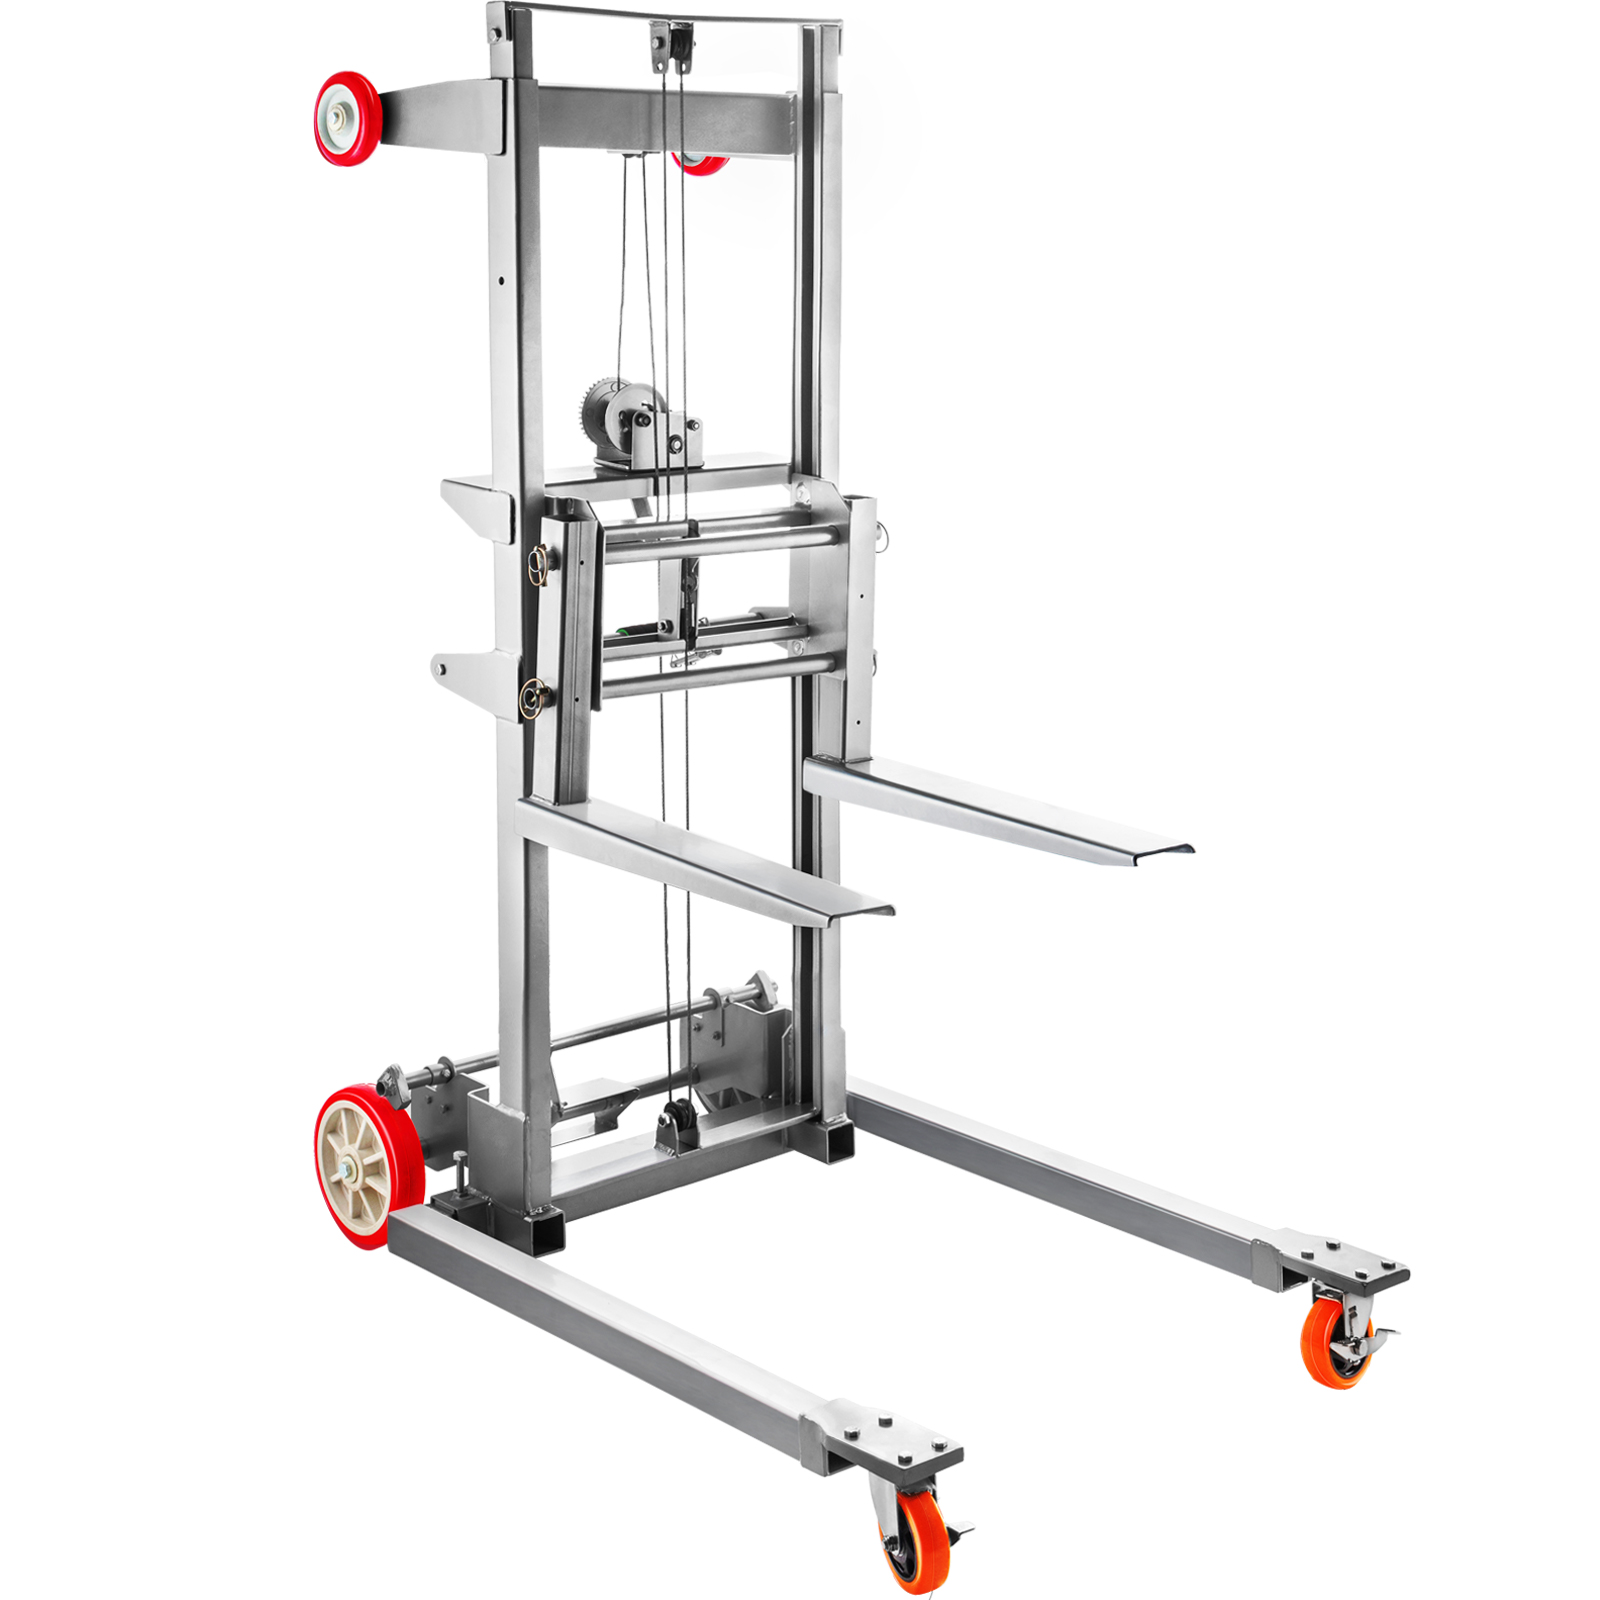 VEVOR Manual Winch Stacker Material Lift 106.3" Max Height 441 lbs Capacity Lift от Vevor Many GEOs